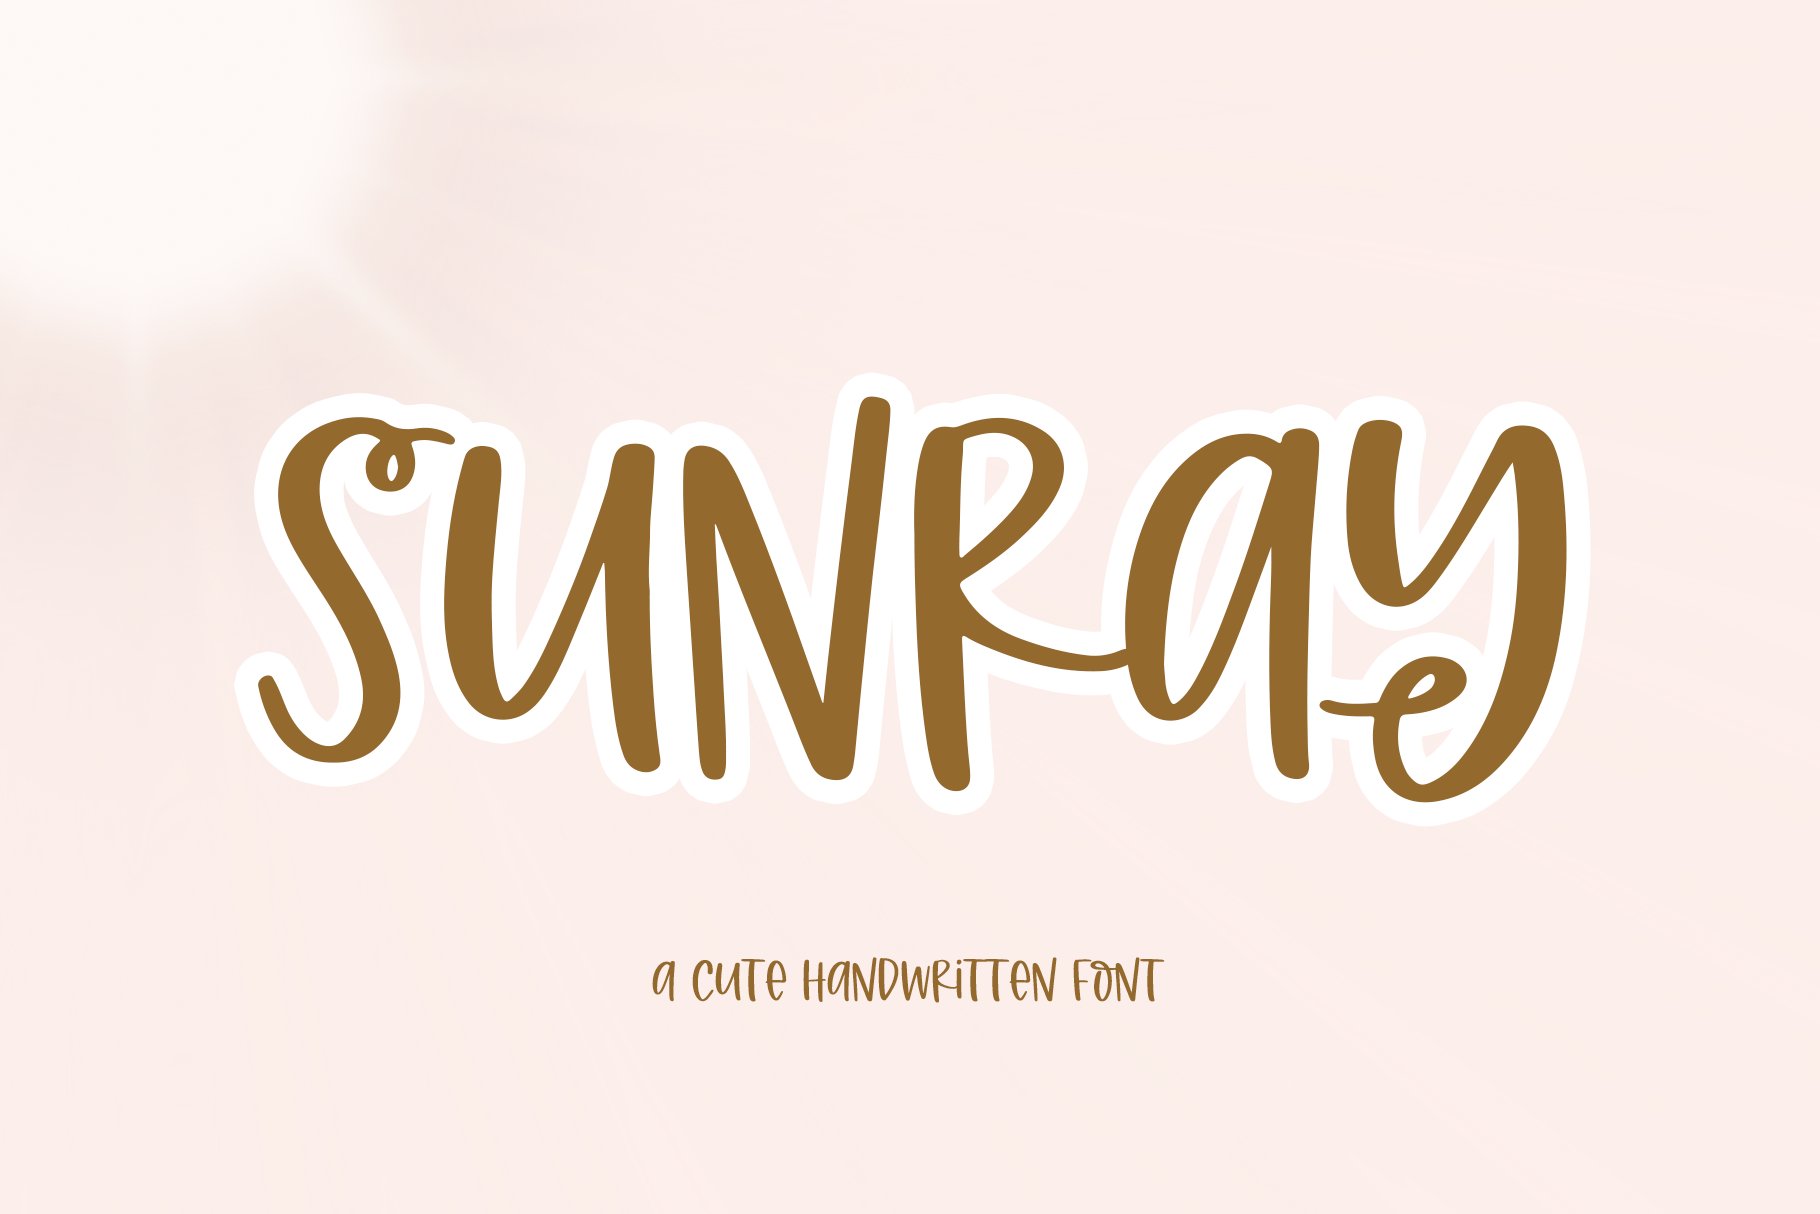 Sunray | Quirky Handwritten Font cover image.